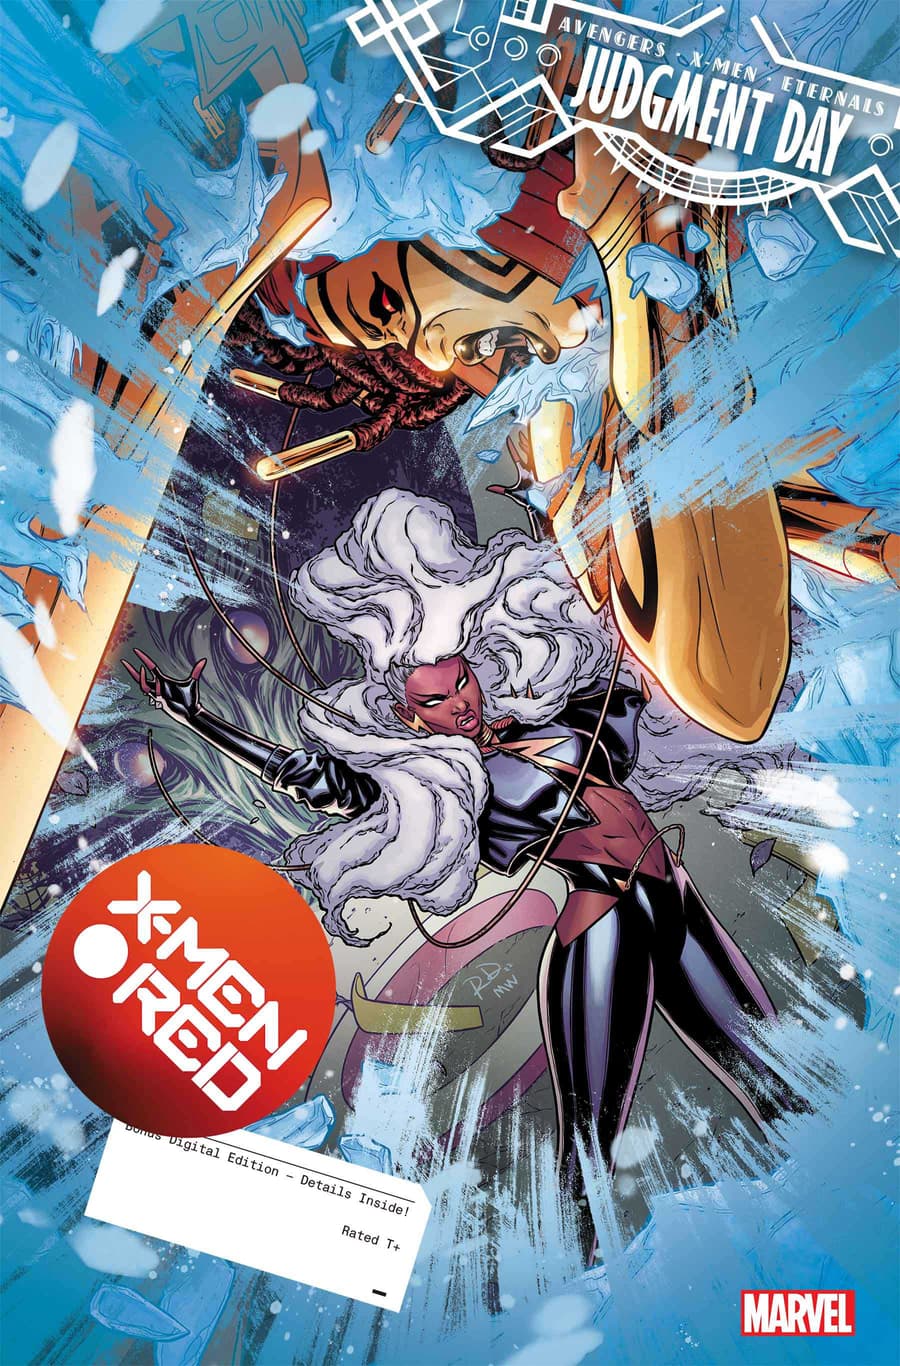 X-MEN RED #7 cover by Russell Dauterman